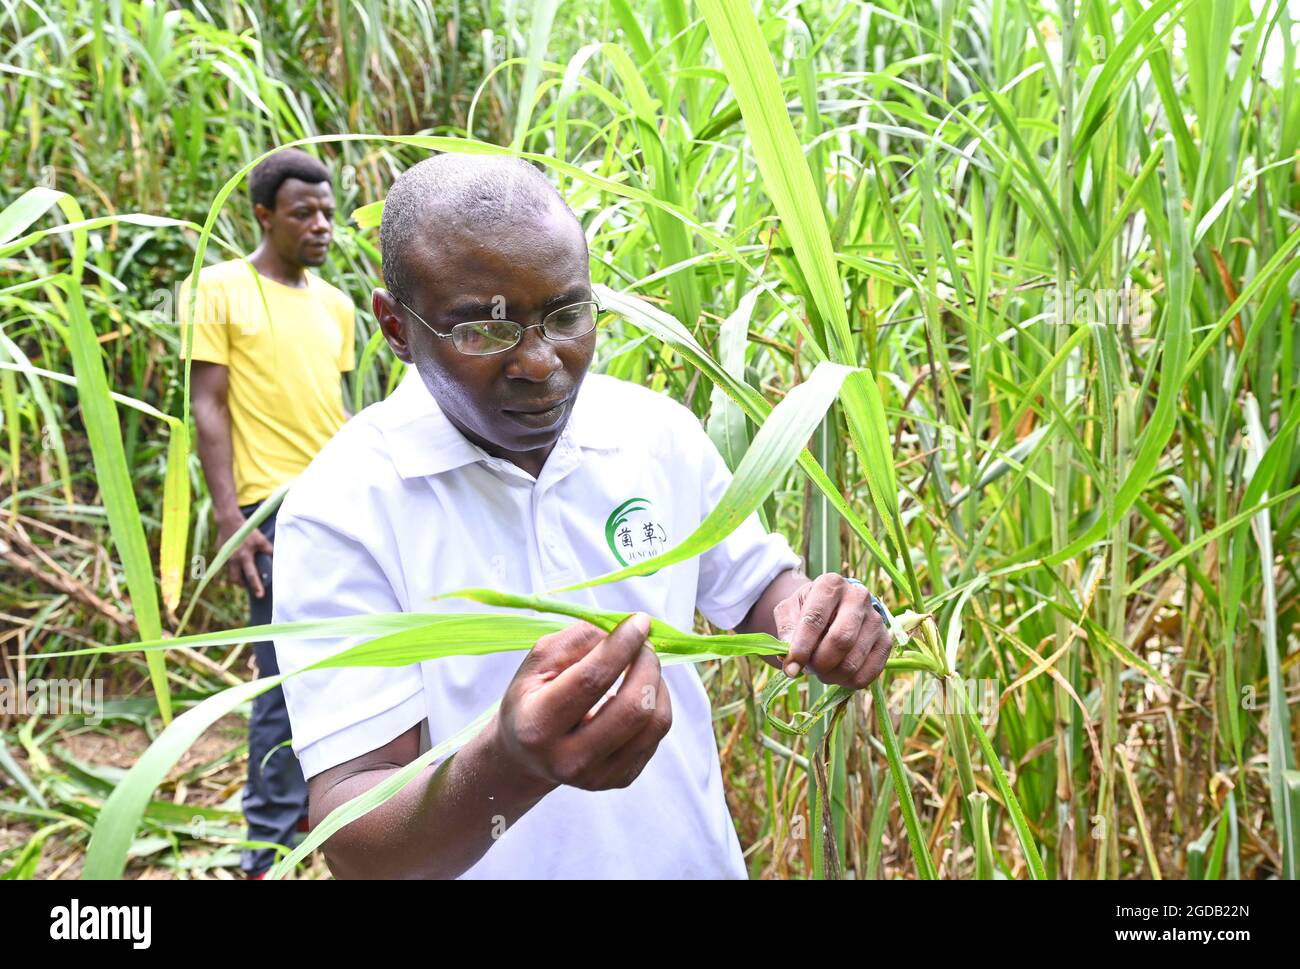 (210812) -- FUZHOU, Aug. 12, 2021 (Xinhua) -- A Nigerian student observes Juncao grass in Fuzhou, southeast China's Fujian Province, Aug. 12, 2021.  China has shared the agricultural technology with over 100 countries. Its use can help increase local income through low-cost mushroom cultivation and contain desertification.   Fujian Agriculture and Forestry University has trained many experts of Juncao technology for African countries since it established the National Engineering Research Center of Juncao. (Xinhua/Lin Shanchuan) Stock Photo